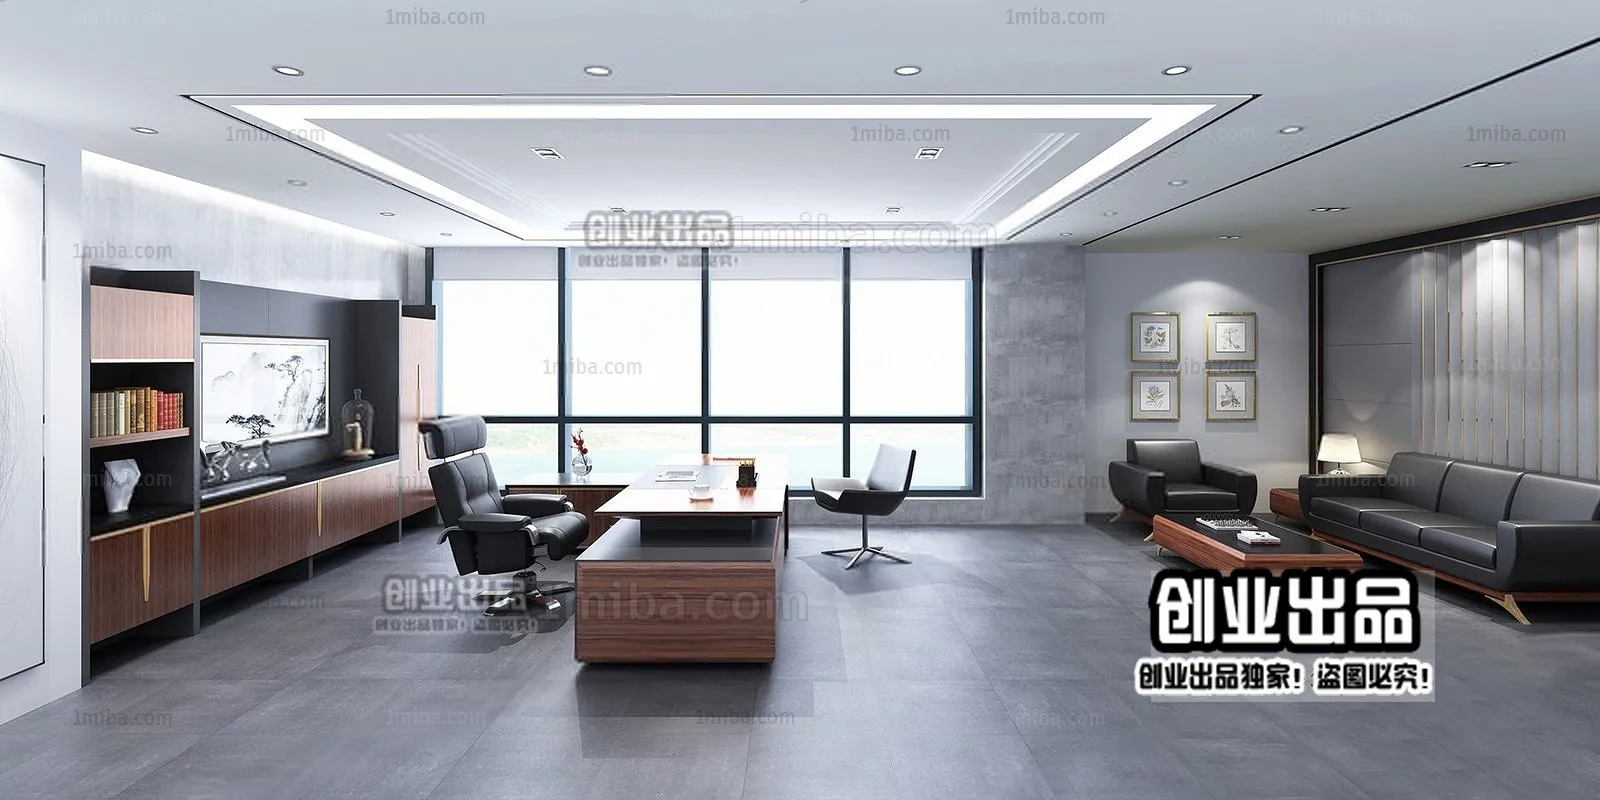 3D OFFICE INTERIOR (VRAY) – MANAGER ROOM 3D SCENES – 175